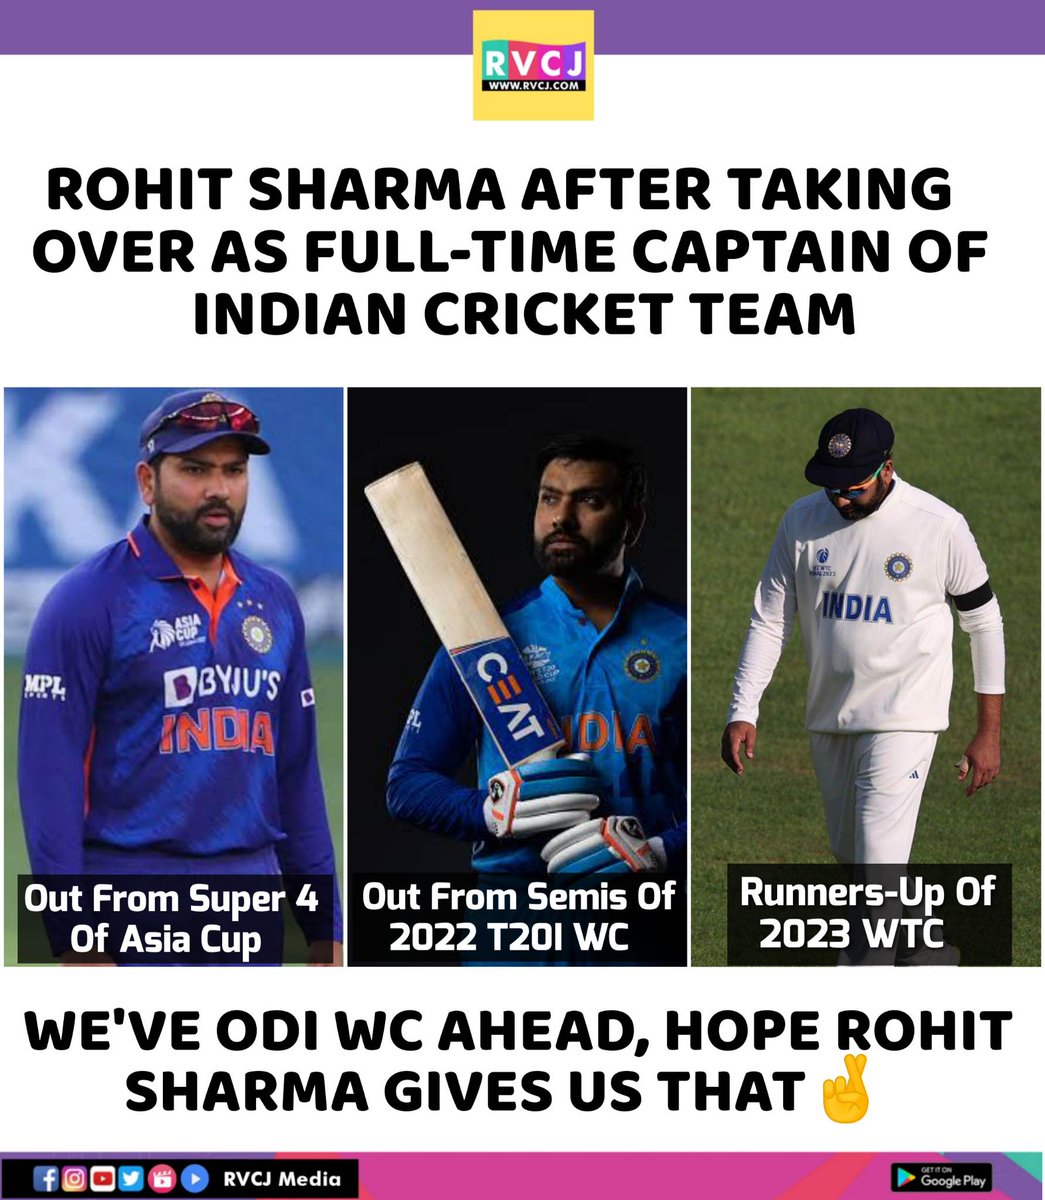 Rohit Sharma after taking captaincy